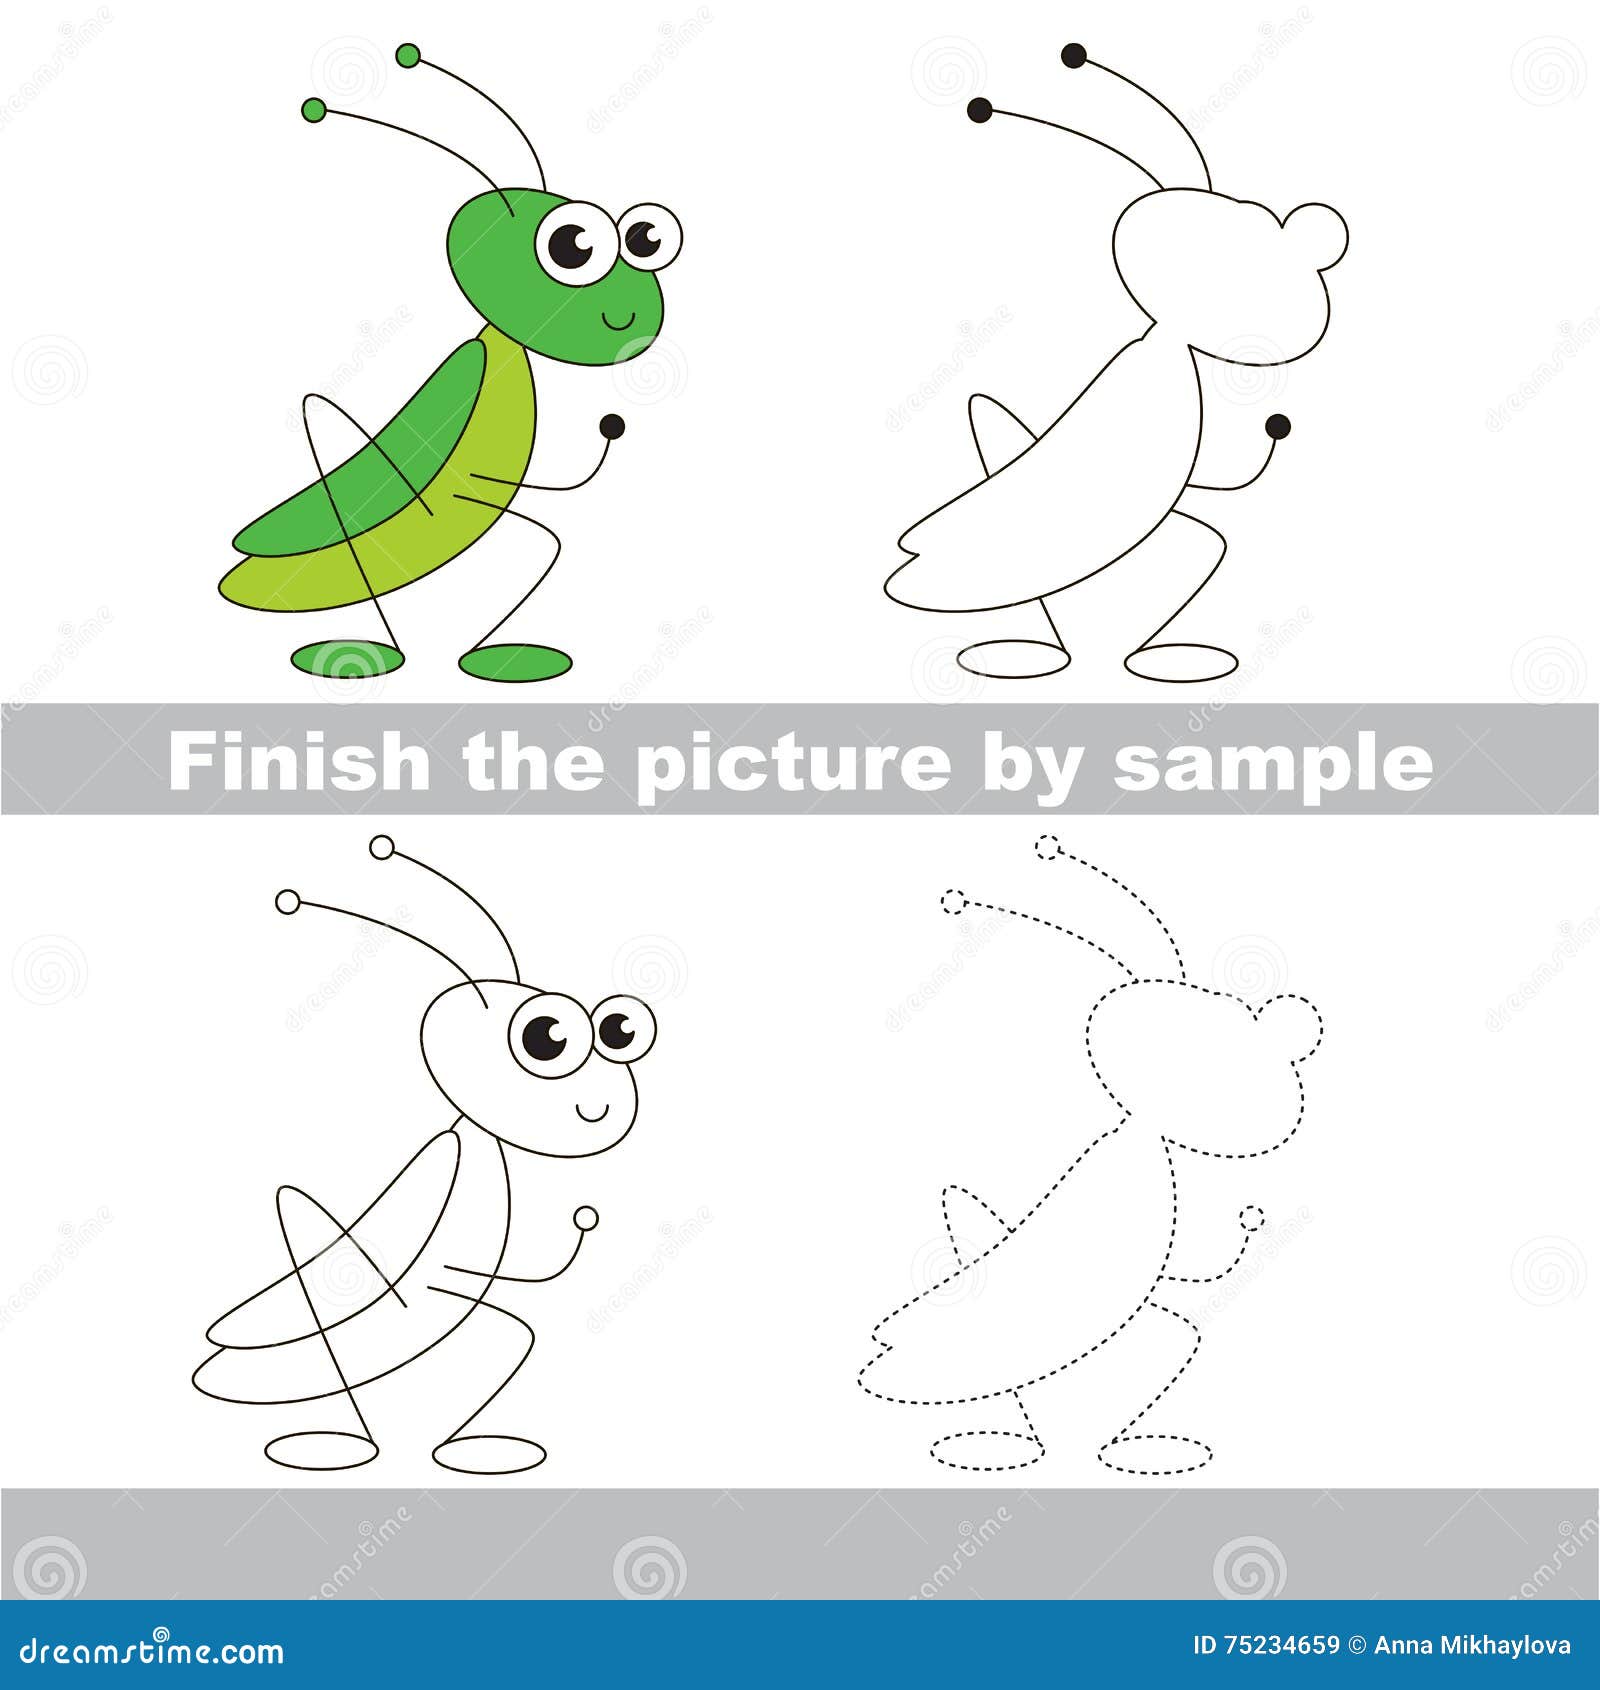 grasshopper drawing worksheet children easy educational kid game simple level difficulty finish picture draw 75234659